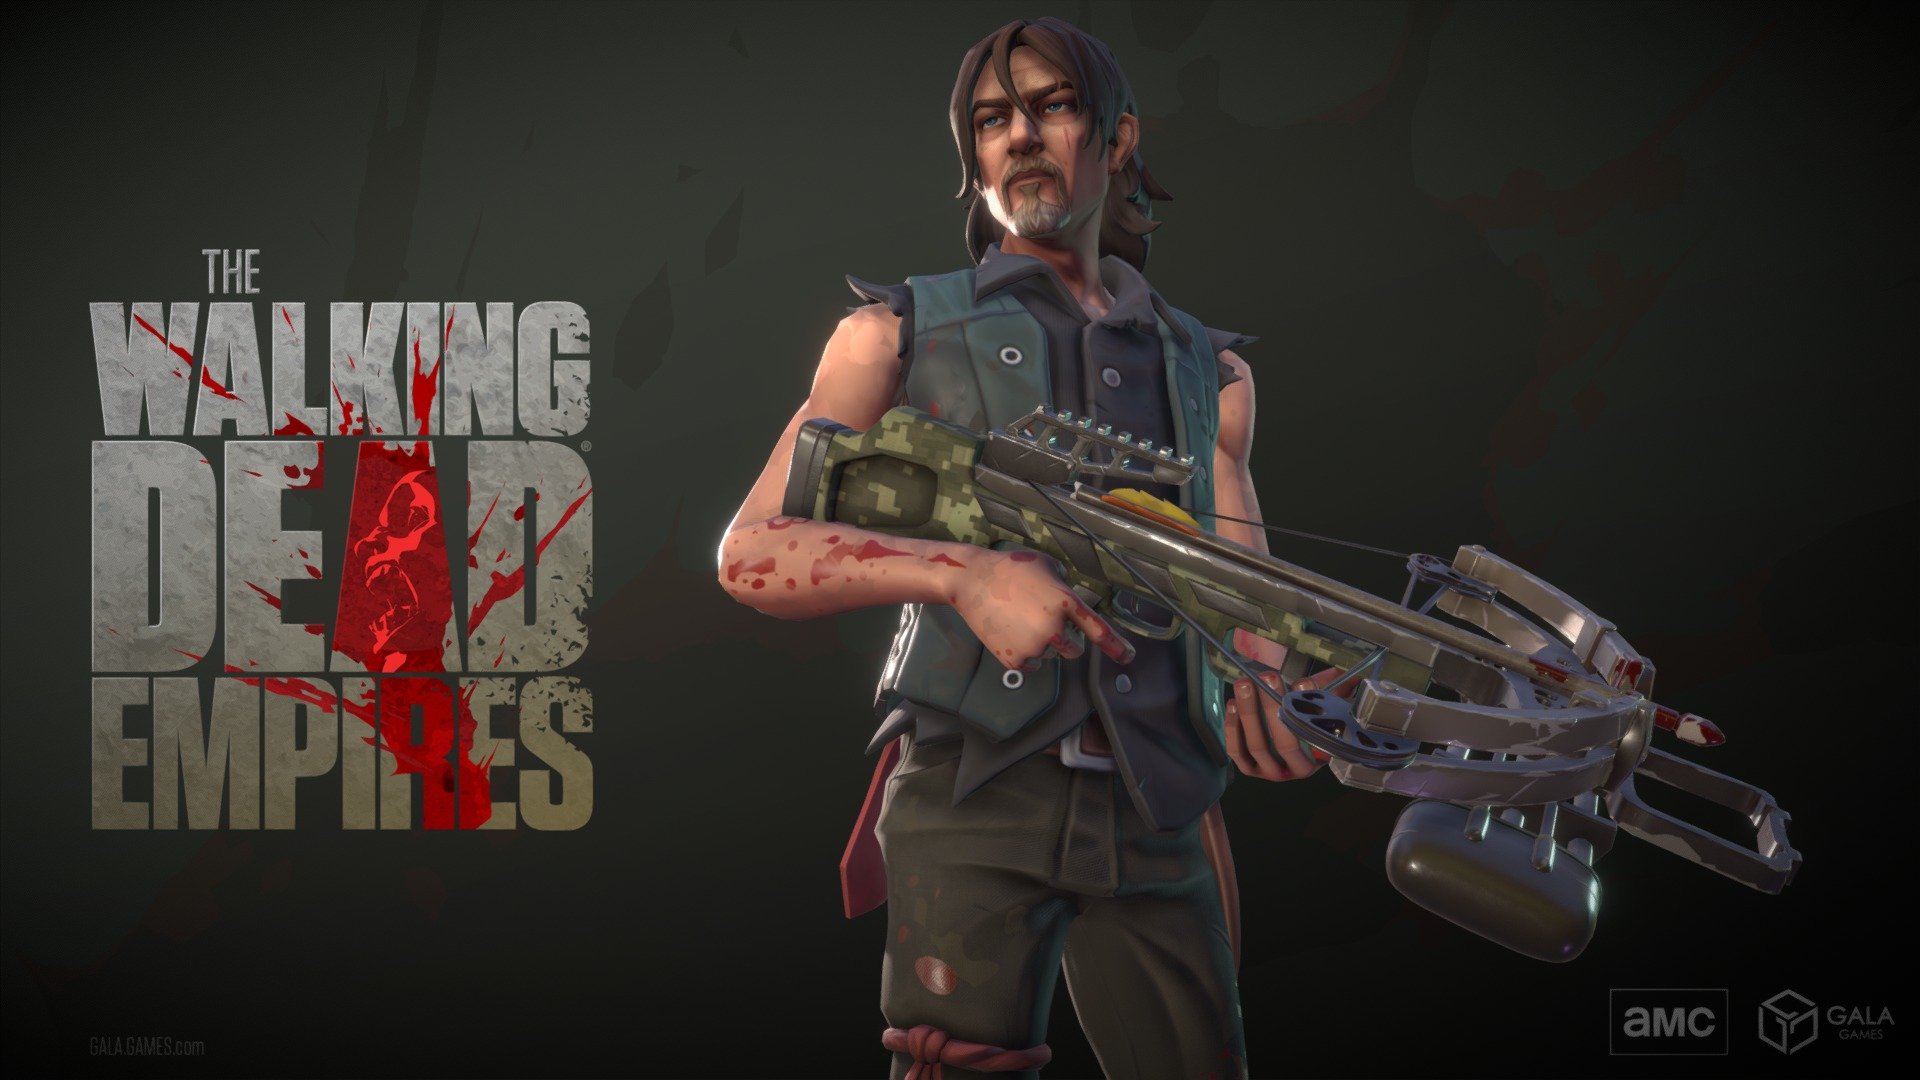 Come and play in the world of the Walking Dead Empires! A new MMO from Gala Games. Get your NFT's while supplies last, or just join in on the carnage and build your empire. (Free to play). Fan favorite Daryl has his crossbow ready, are you? 

Pre Alpha beta coming soon, check out info at - gala.games - The Walking Dead Empires: Daryl - 3D model by emberk2 3d model